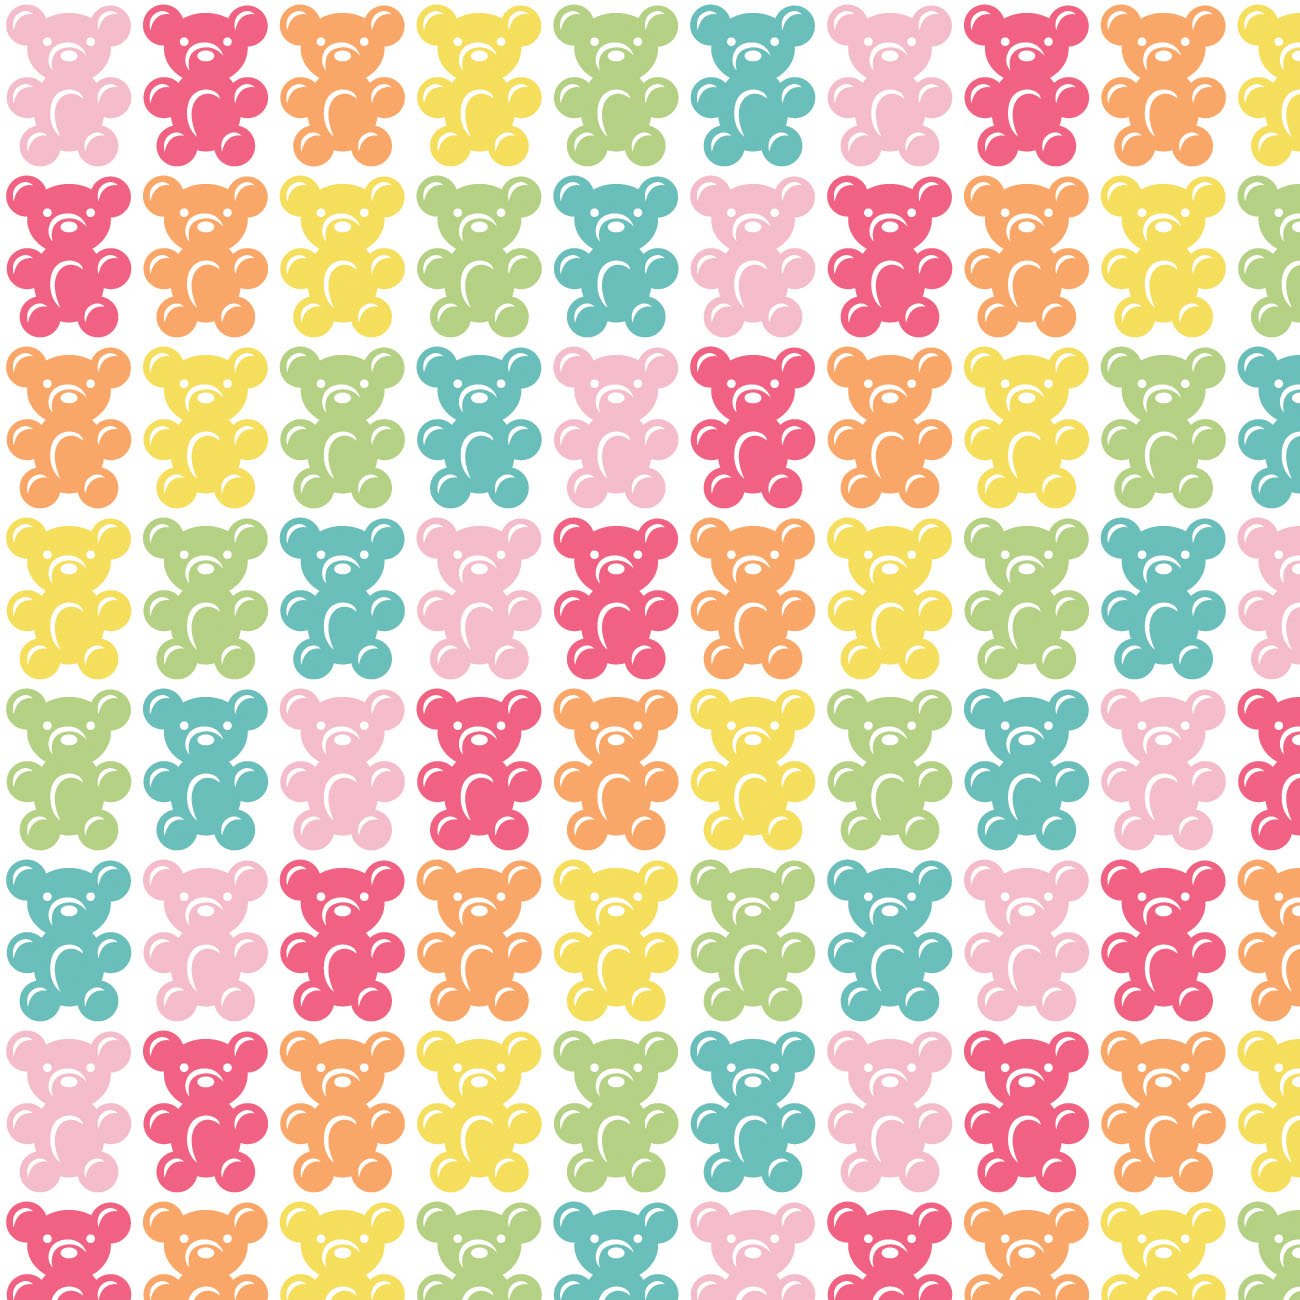 Be The Rainbow by CDS - 2 Yard Cotton Cut- Bright Gummy Bears - White